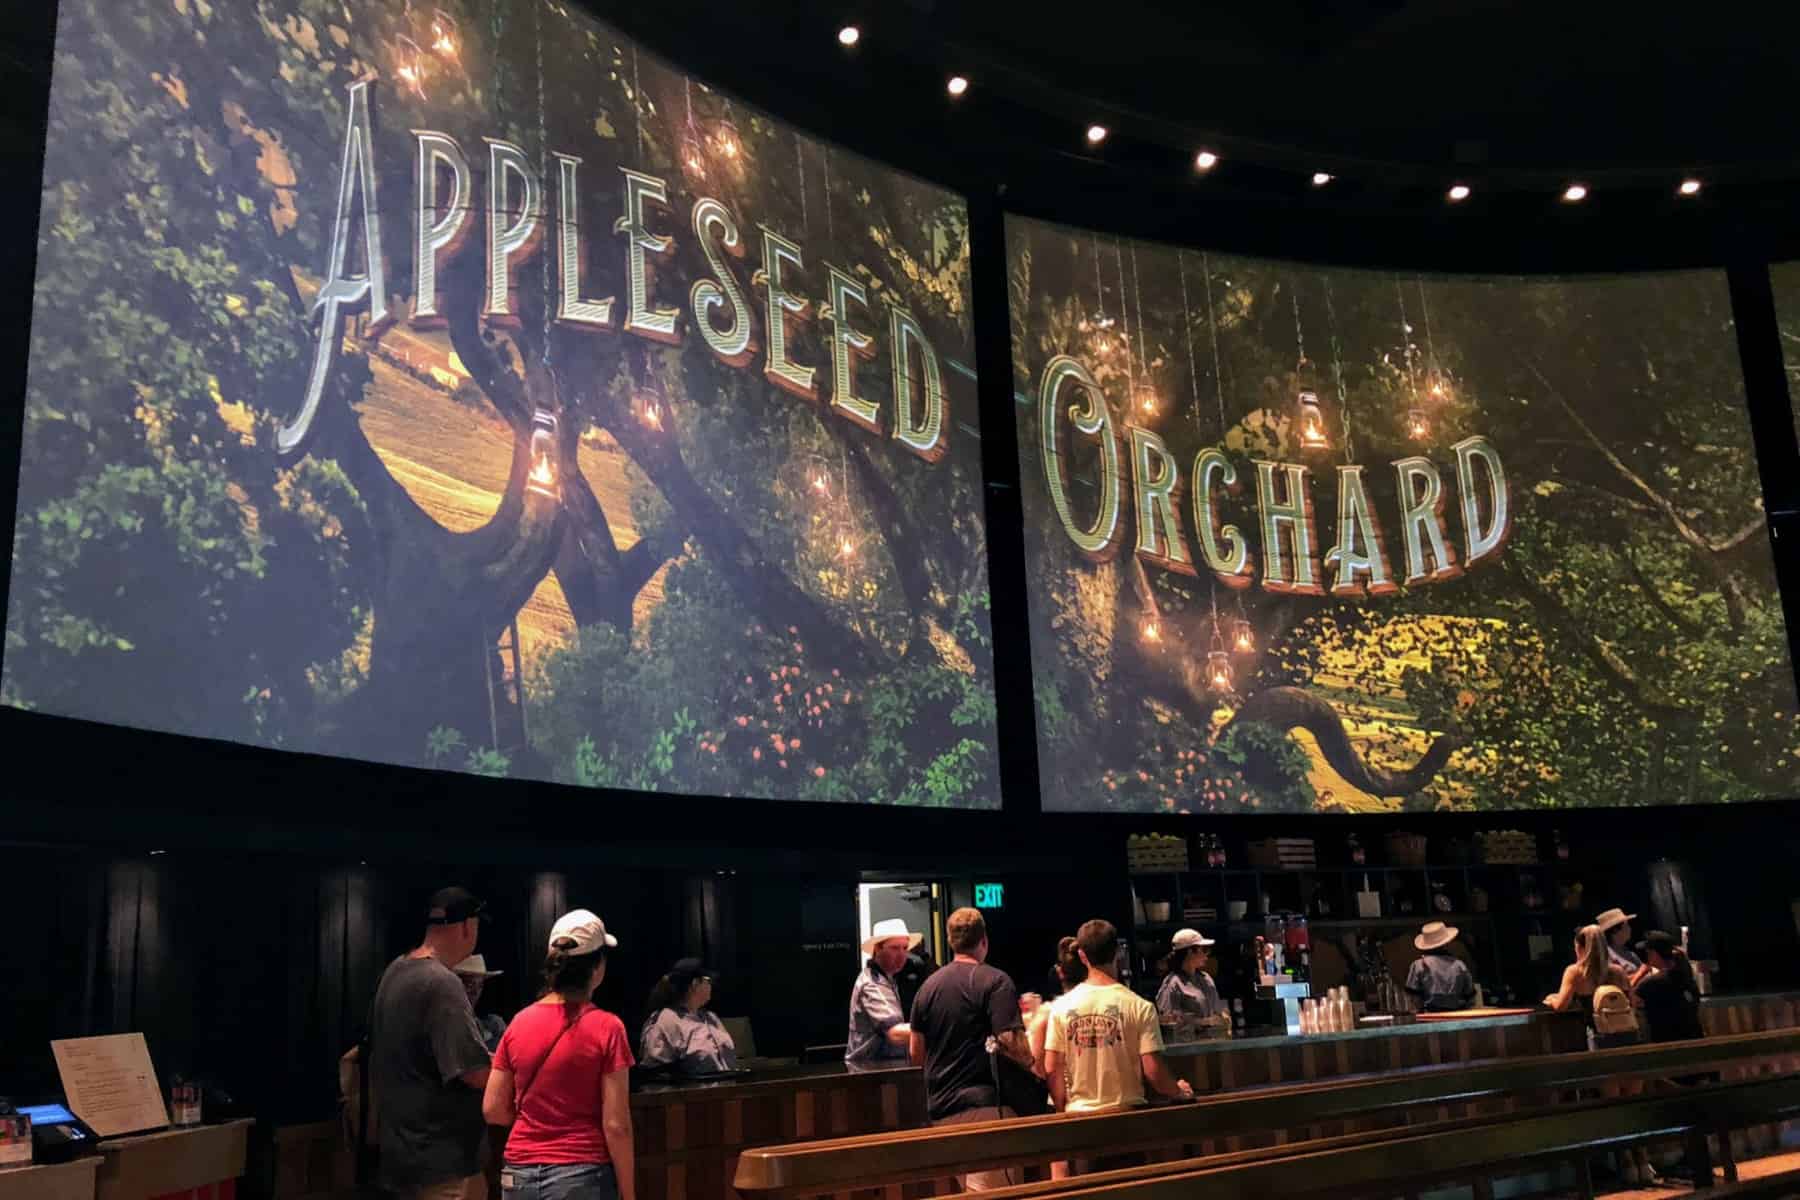 Appleseed Orchard Menu & Review (2021 Epcot Food & Wine Festival)